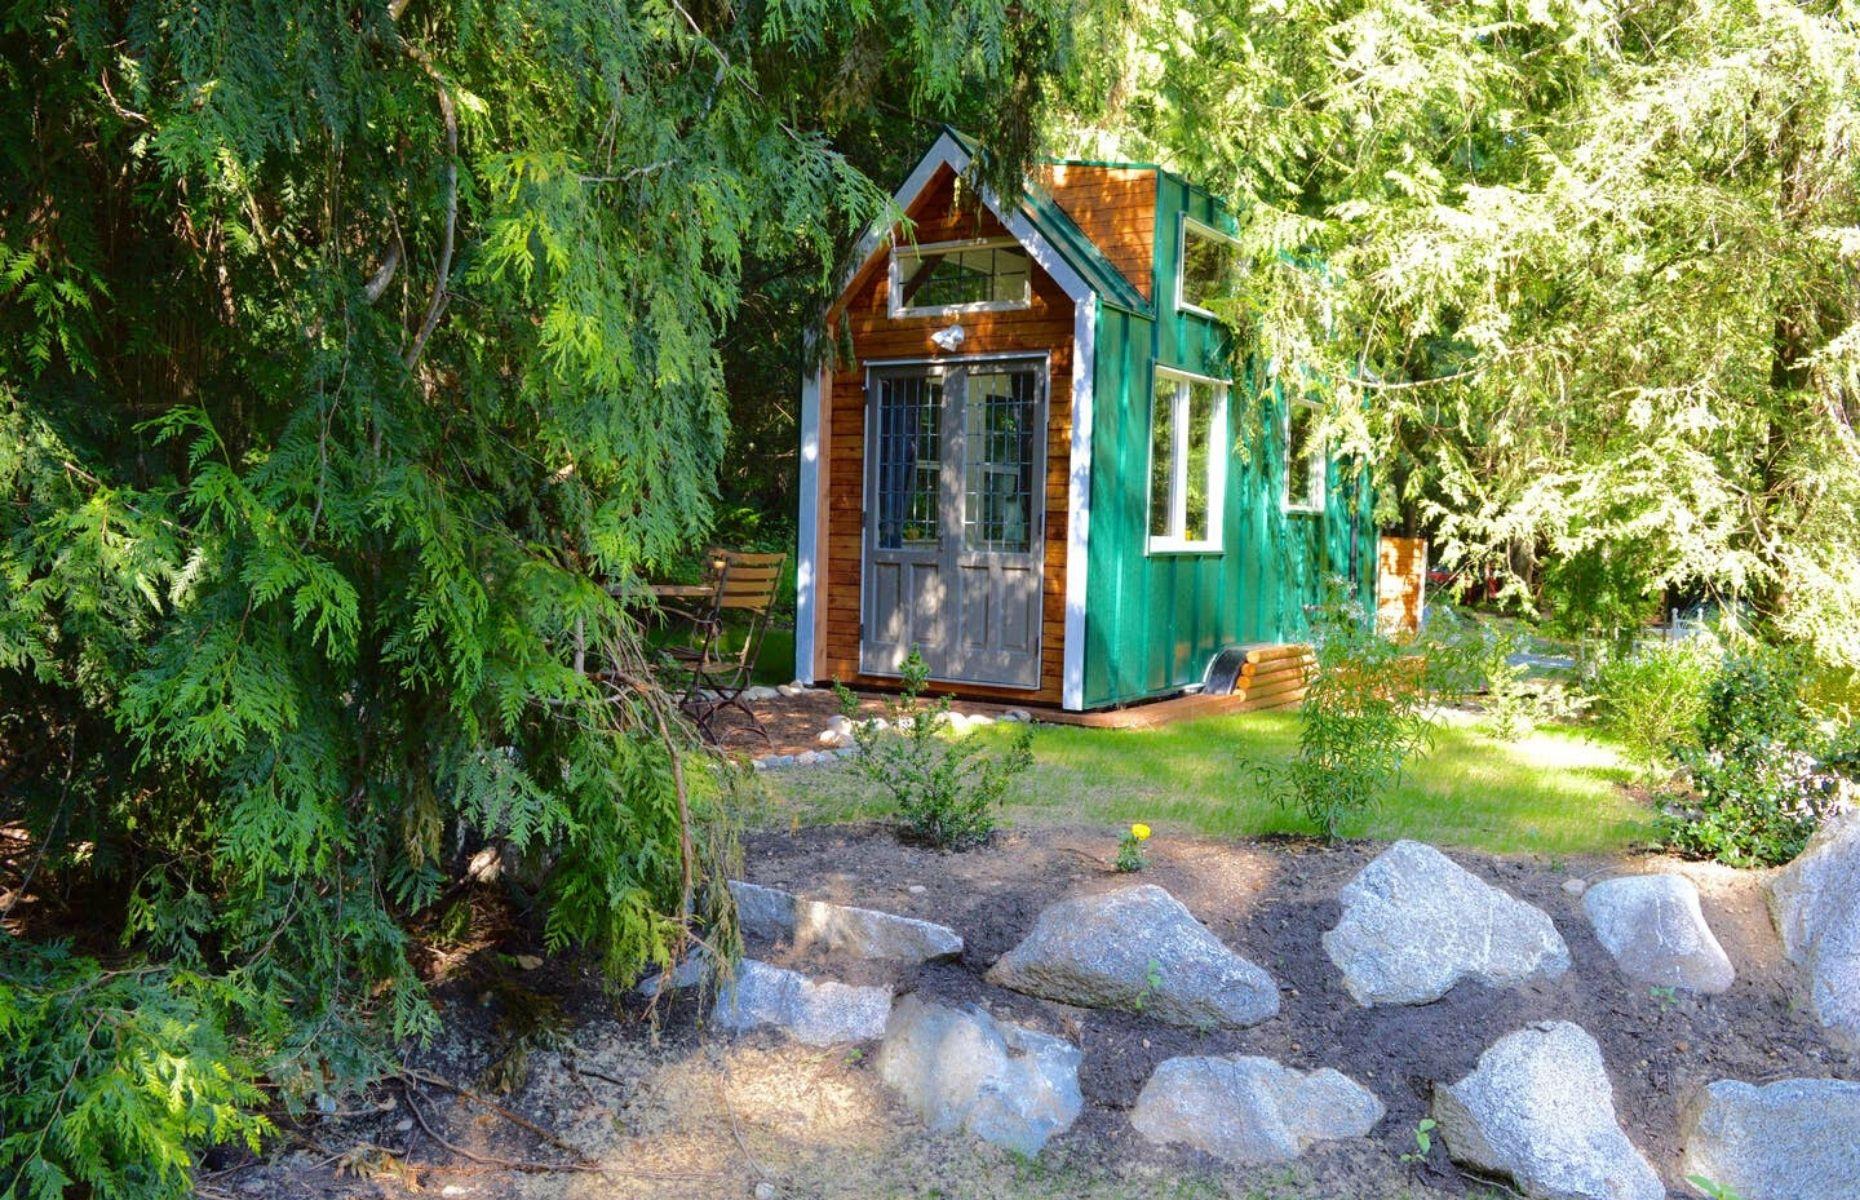 <p>The <a href="https://www.airbnb.ca/rooms/35358619?source_impression_id=p3_1582023504_1CMLIofYXRVPtTTJ">Roberts Creek Park Tiny House</a> is every downsizer's dream come true. The mini, handmade cabin is sweet and petite in equal measure and is perfectly designed for two people. Despite looking like a child's doll's house from the outside, the clandestine timber cabin is surprisingly spacious inside. Let's take a look at what the interior has to offer...</p>